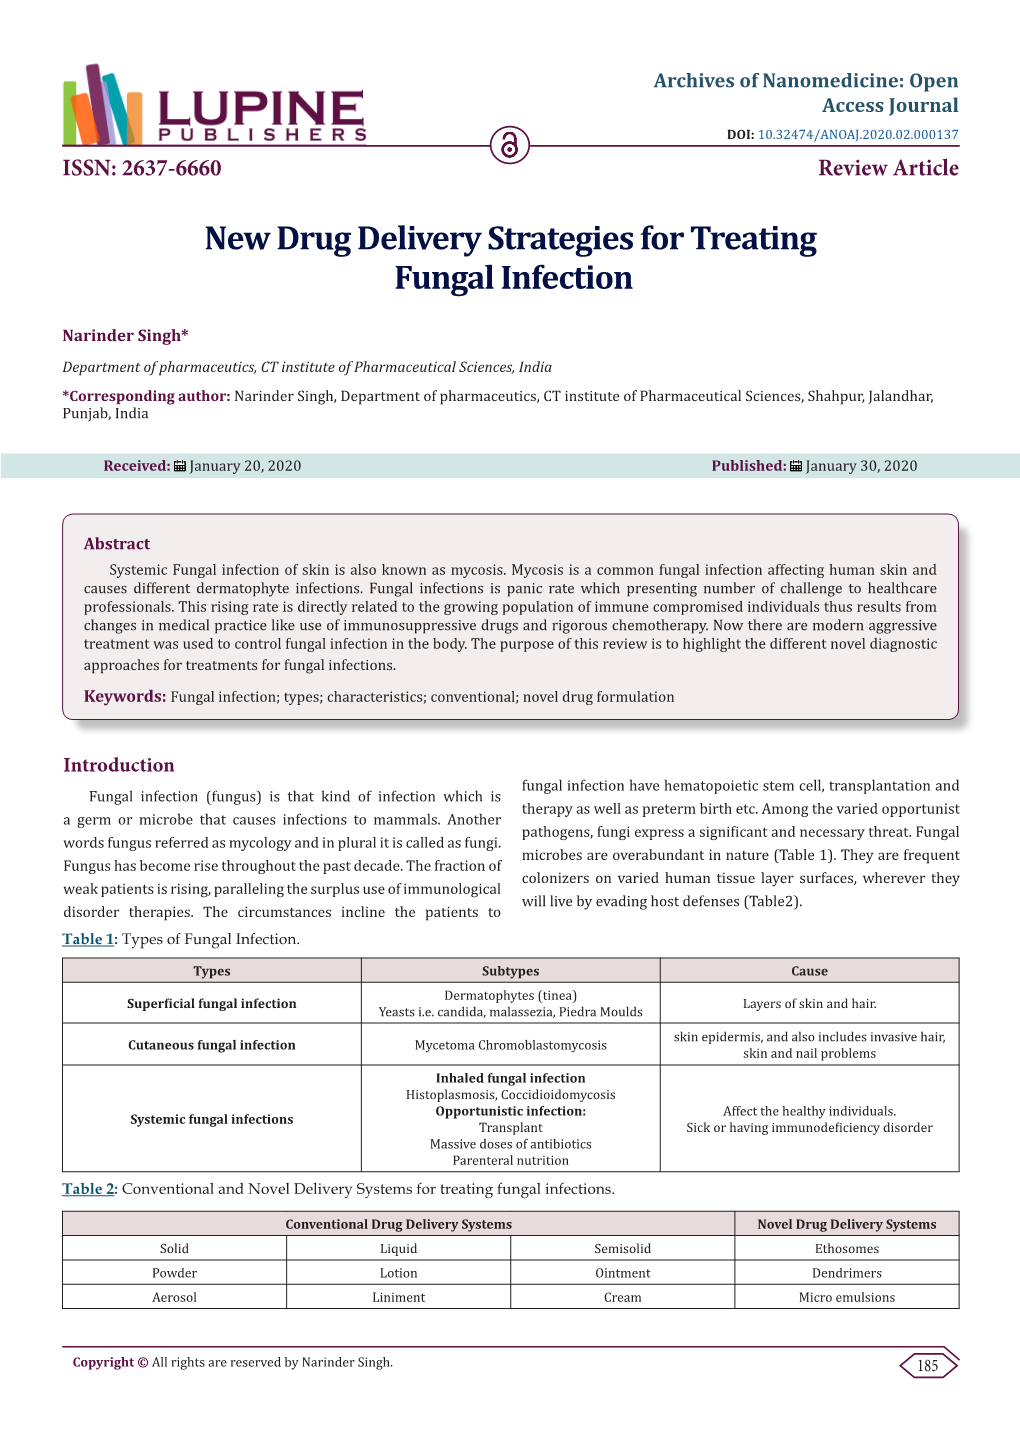 New Drug Delivery Strategies for Treating Fungal Infection